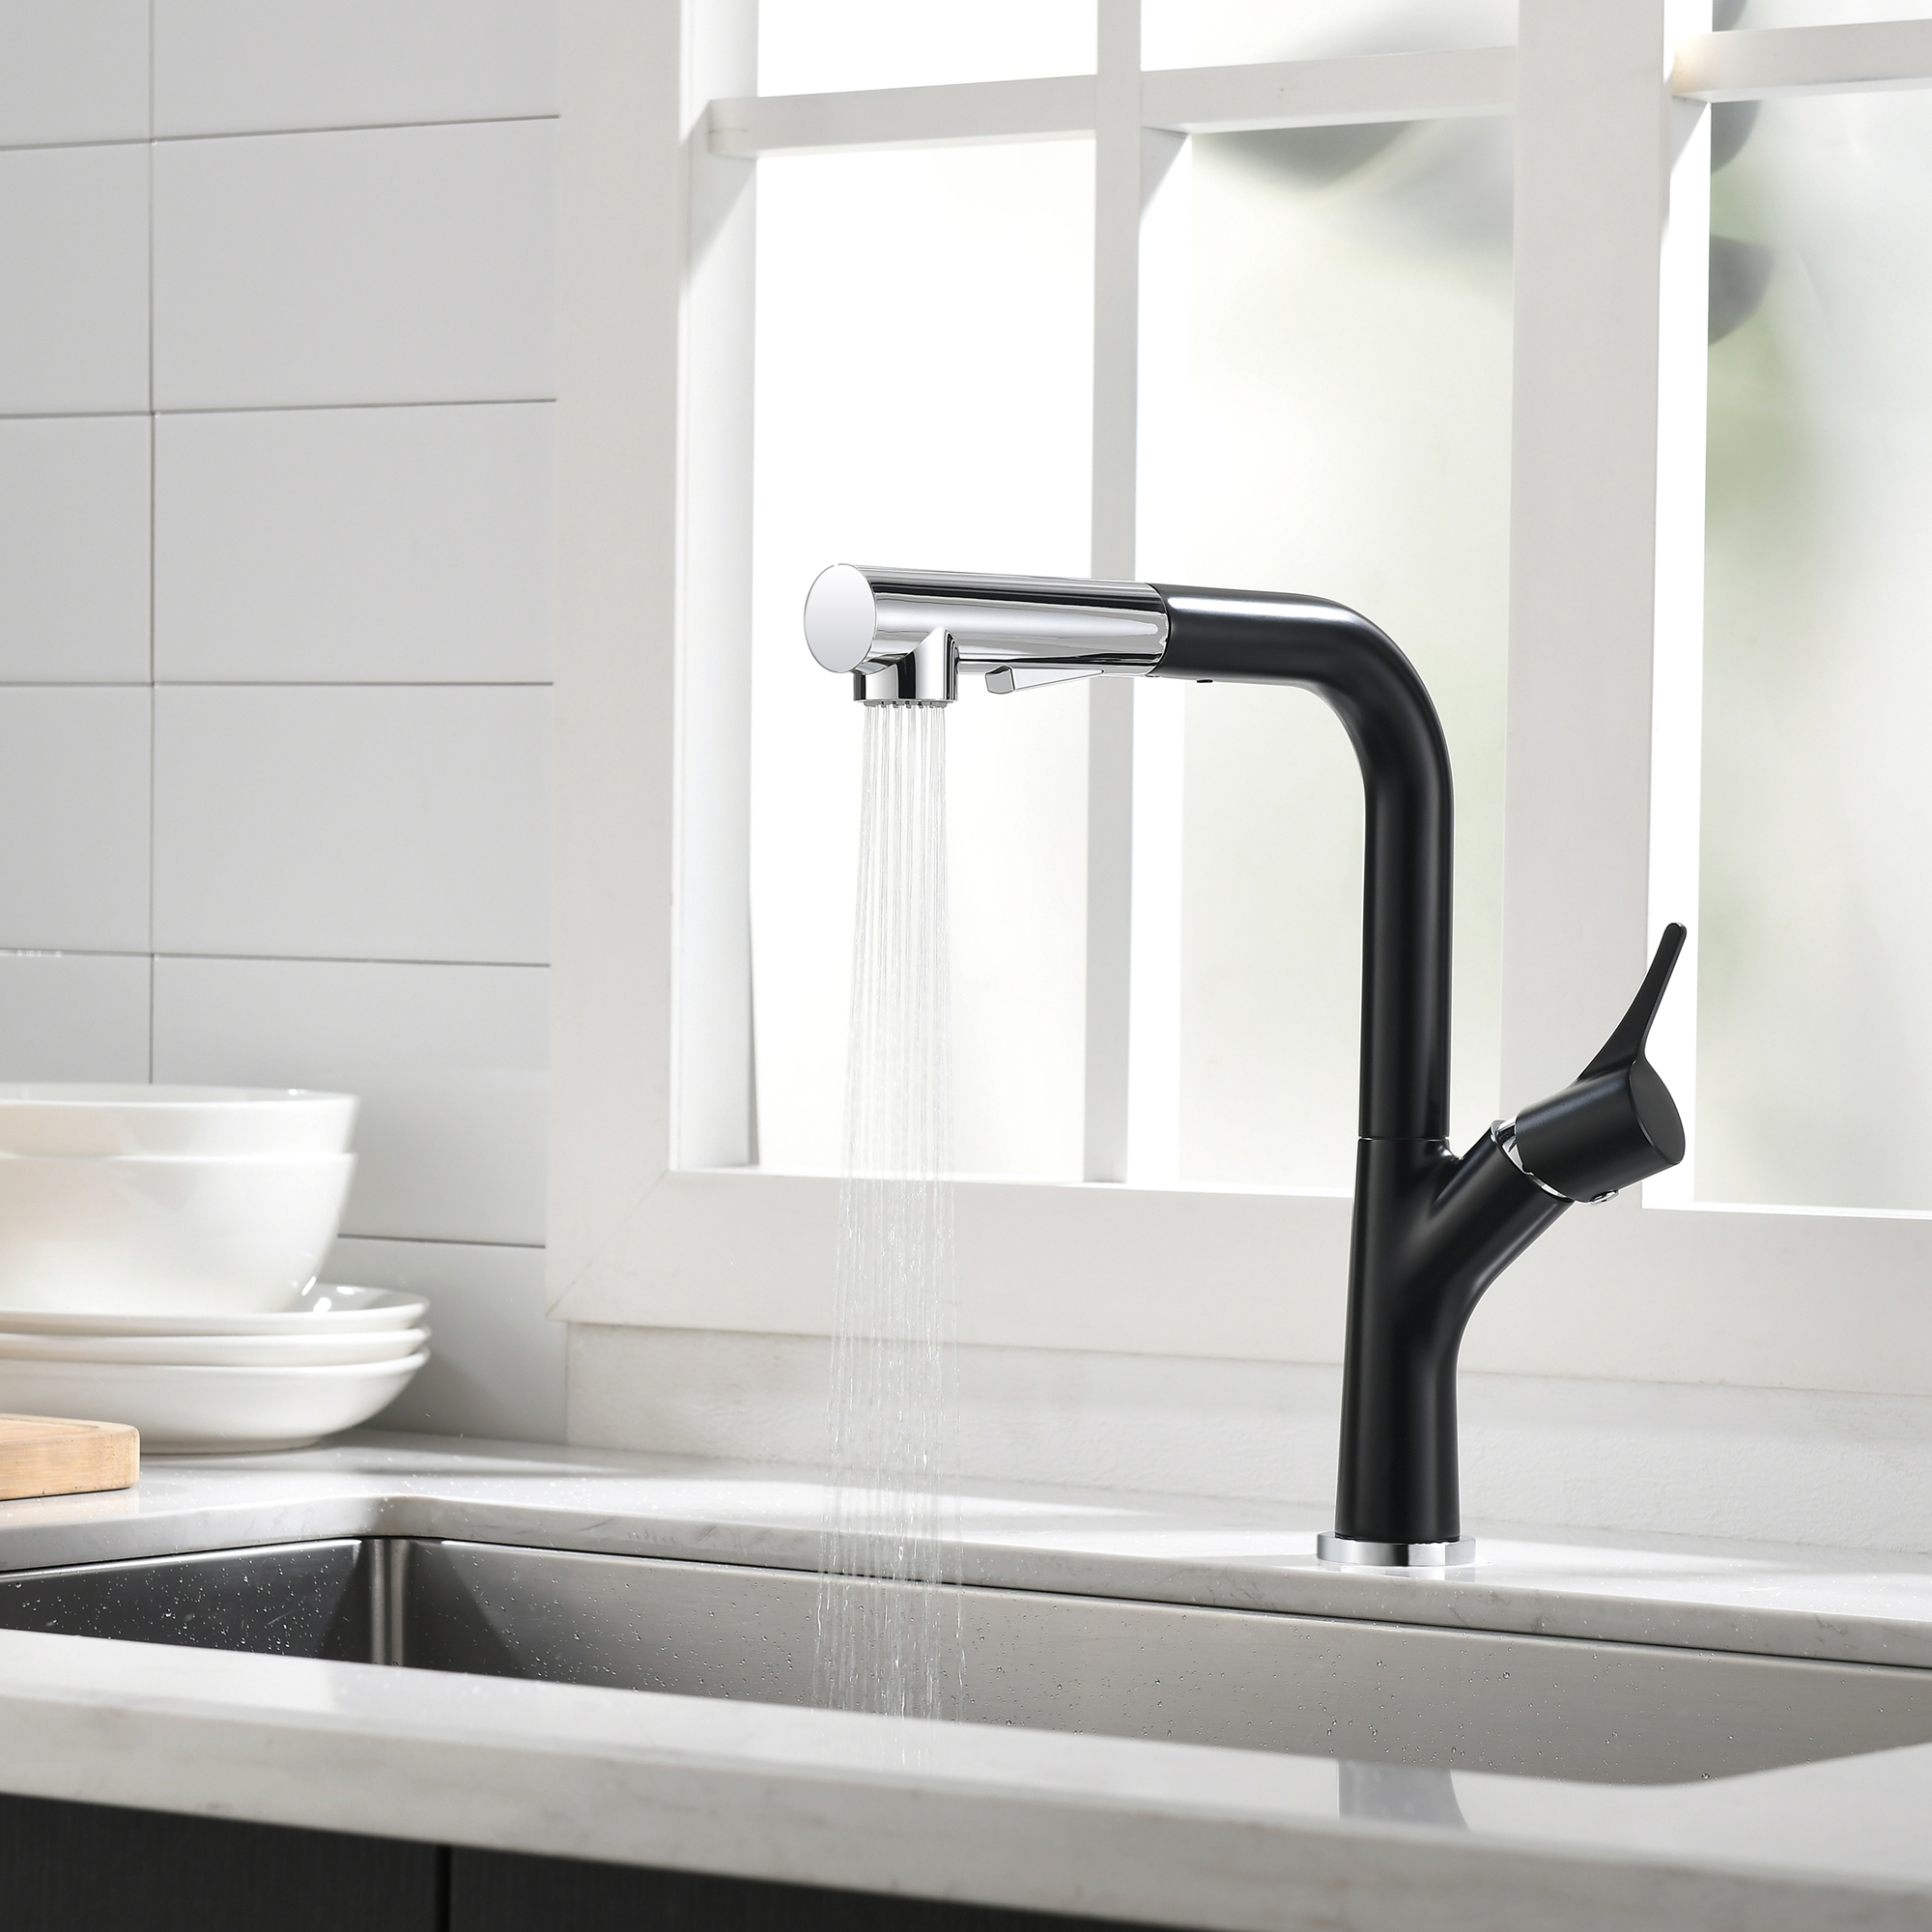 Multifunctional Drink Water Faucet Sink Pull Down Kitchen Mixer With Cupc Certificate